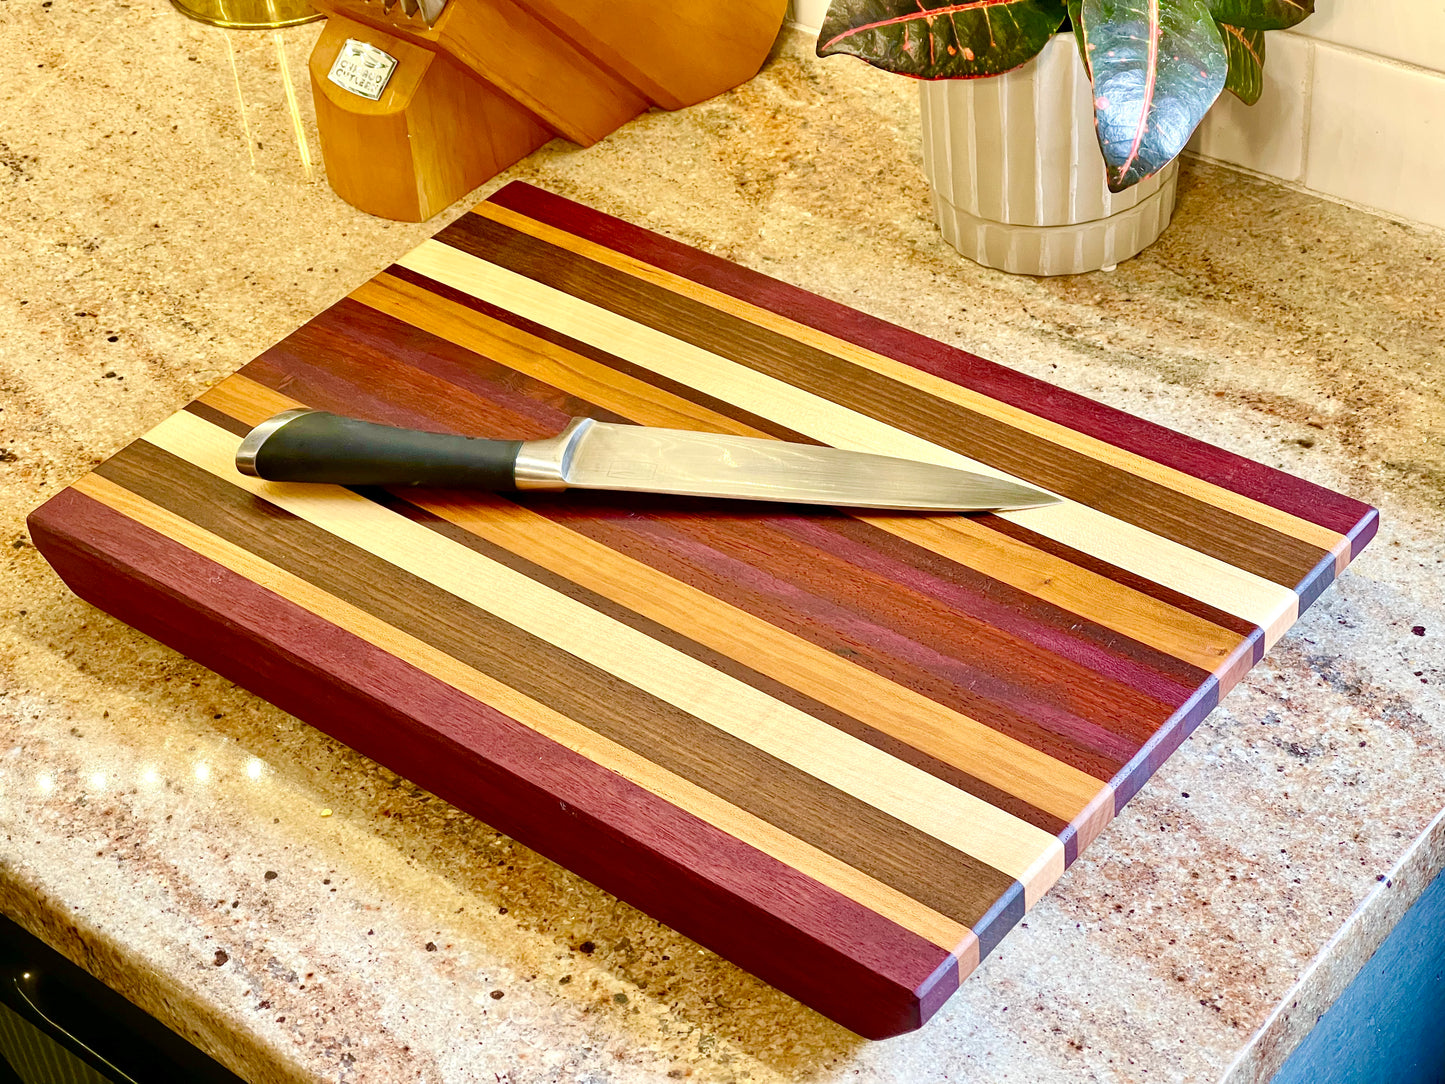 How We Craft Hard Rock Maple Into Premium Cutting Boards